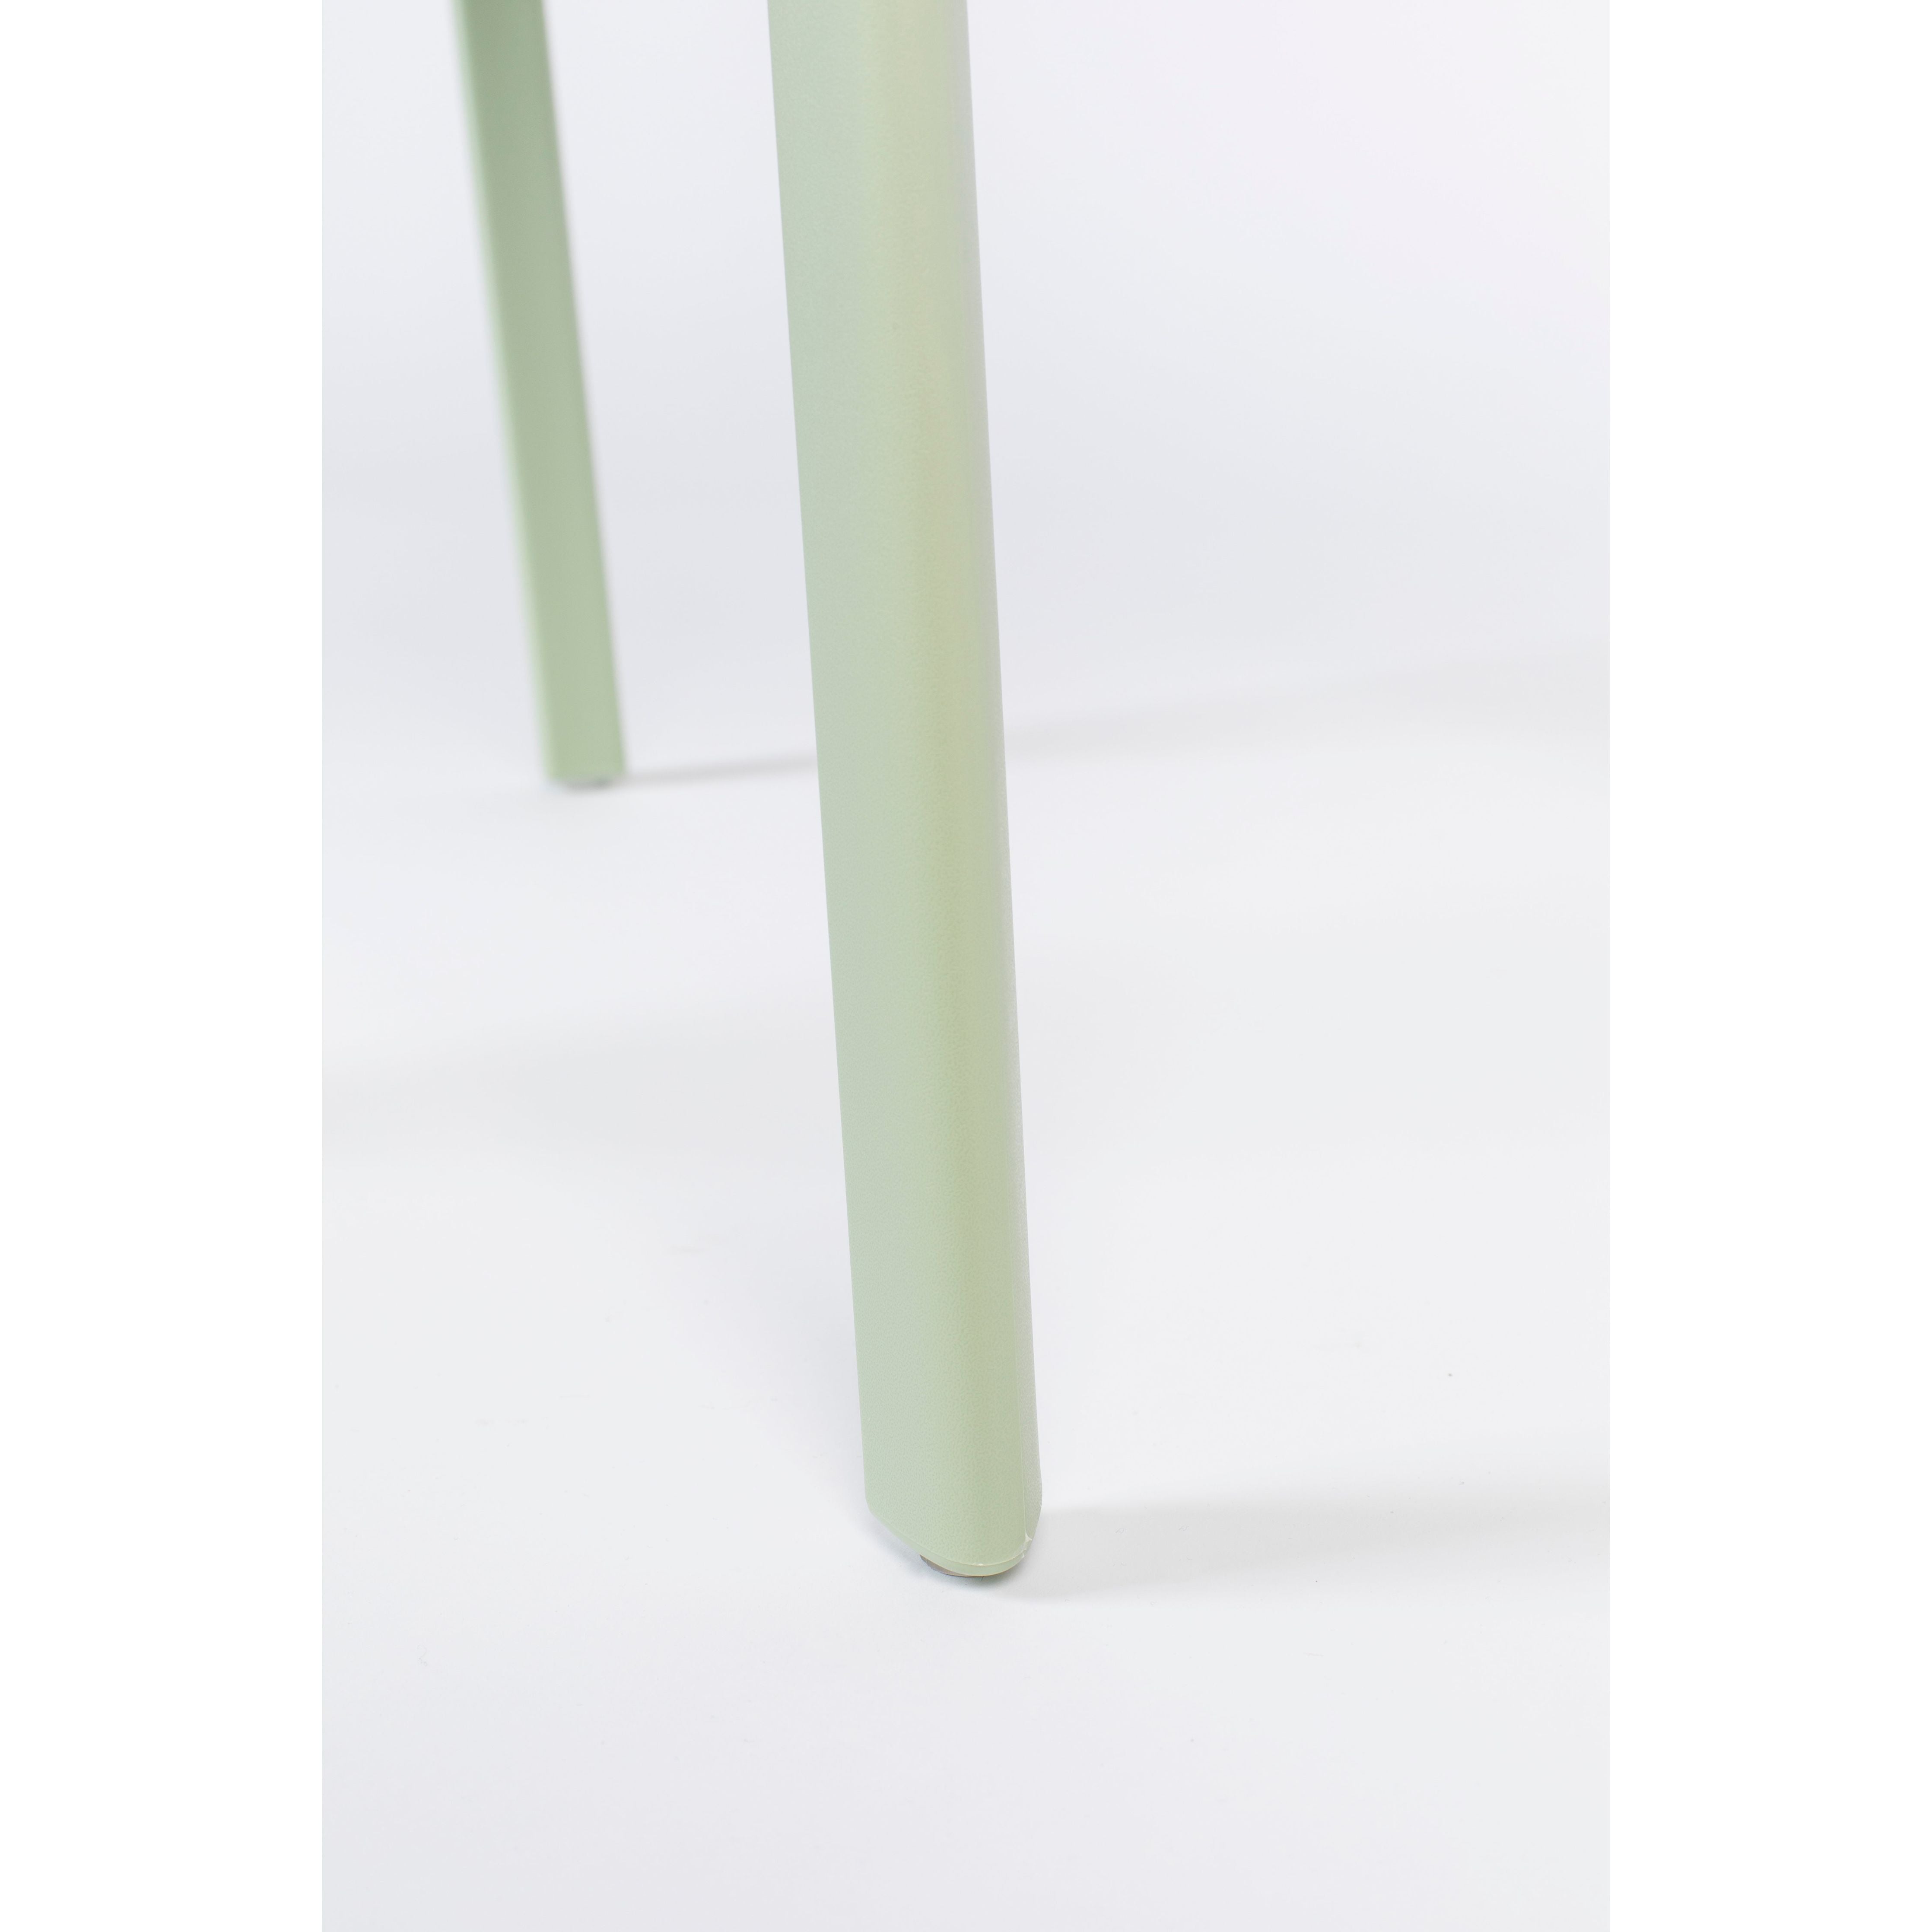 Chair clive light green